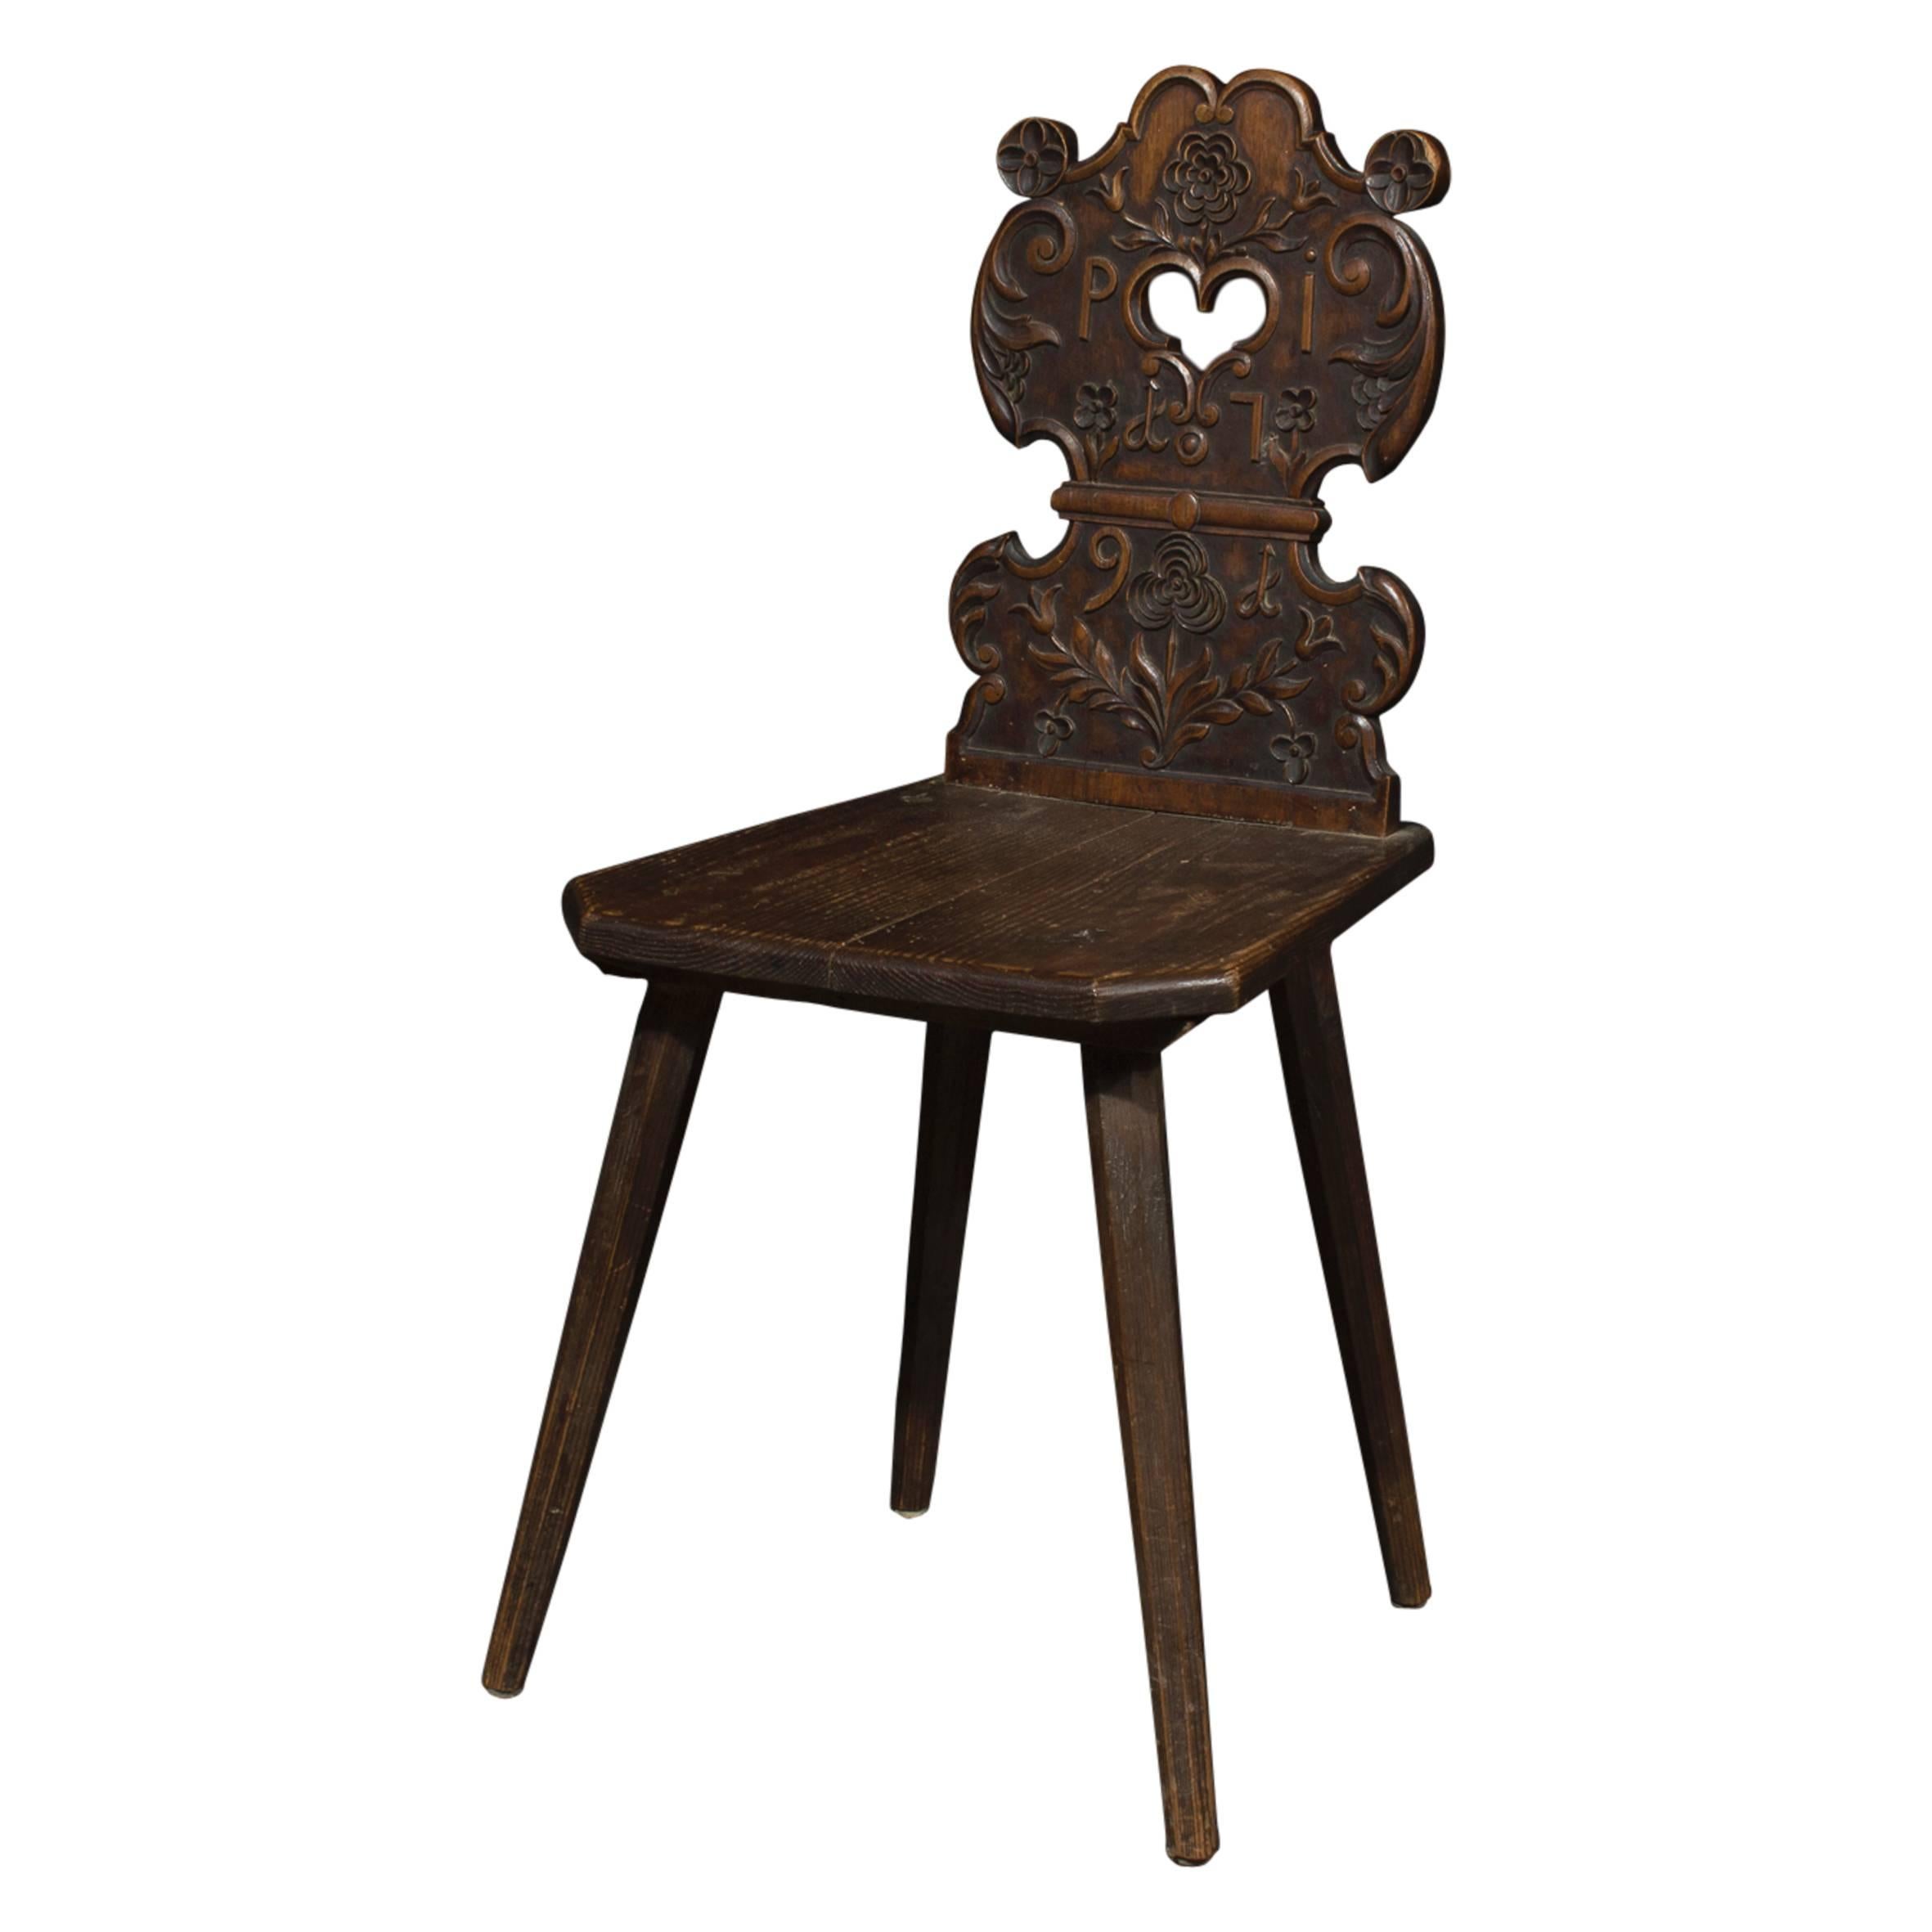 Late Baroque Carved Black Forest Wood Chair, Dated 1791